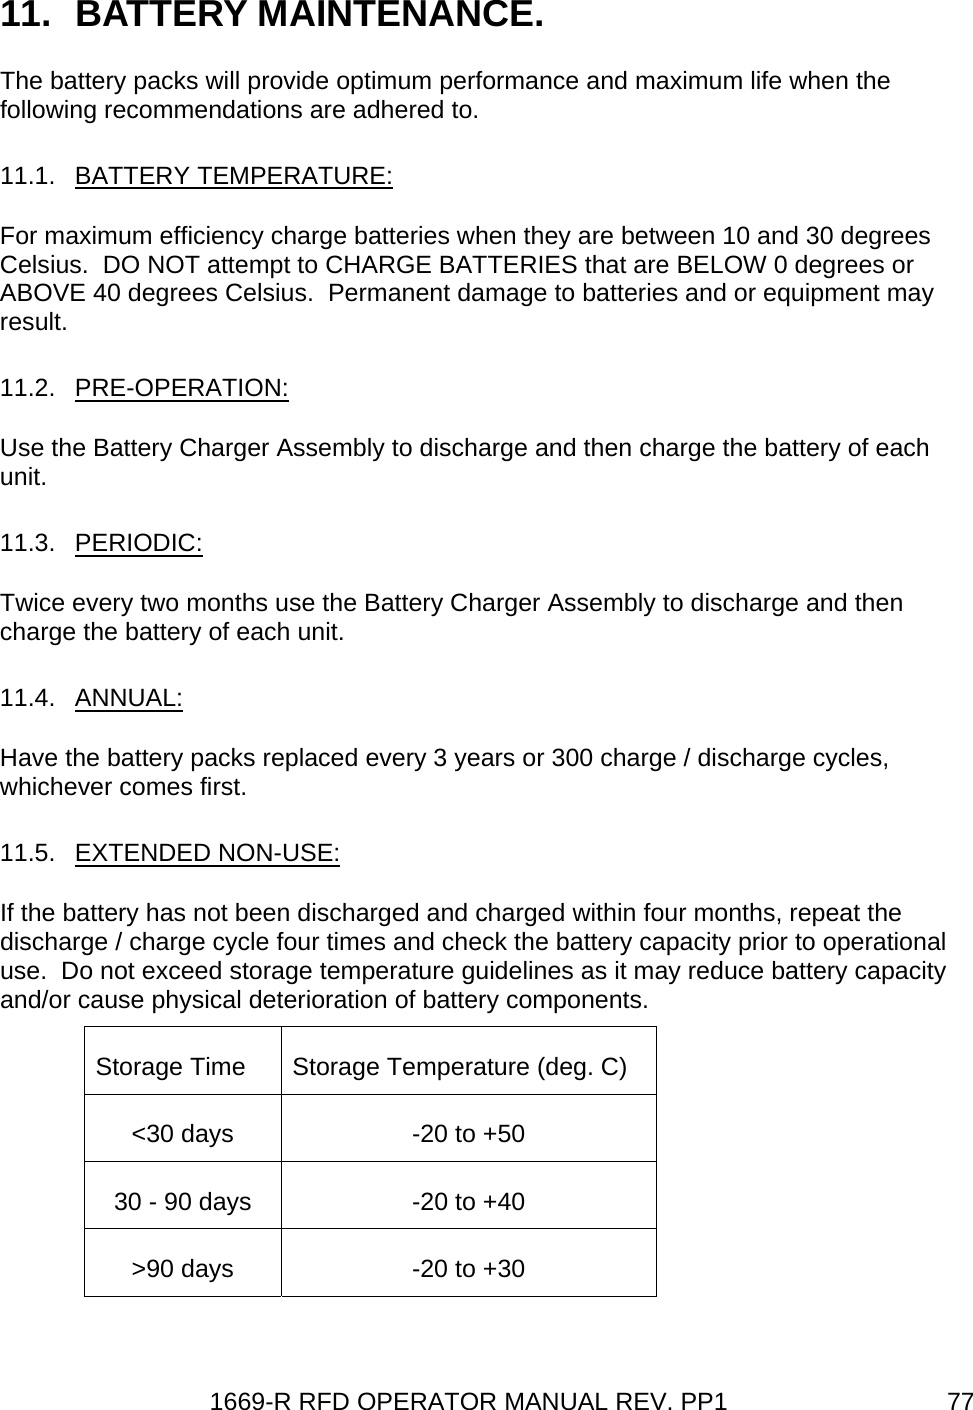 1669-R RFD OPERATOR MANUAL REV. PP1  7711. BATTERY MAINTENANCE. The battery packs will provide optimum performance and maximum life when the following recommendations are adhered to. 11.1. BATTERY TEMPERATURE: For maximum efficiency charge batteries when they are between 10 and 30 degrees Celsius.  DO NOT attempt to CHARGE BATTERIES that are BELOW 0 degrees or ABOVE 40 degrees Celsius.  Permanent damage to batteries and or equipment may result. 11.2. PRE-OPERATION: Use the Battery Charger Assembly to discharge and then charge the battery of each unit. 11.3. PERIODIC: Twice every two months use the Battery Charger Assembly to discharge and then charge the battery of each unit.  11.4. ANNUAL: Have the battery packs replaced every 3 years or 300 charge / discharge cycles, whichever comes first. 11.5.  EXTENDED NON-USE:   If the battery has not been discharged and charged within four months, repeat the discharge / charge cycle four times and check the battery capacity prior to operational use.  Do not exceed storage temperature guidelines as it may reduce battery capacity and/or cause physical deterioration of battery components. Storage Time  Storage Temperature (deg. C) &lt;30 days  -20 to +50 30 - 90 days  -20 to +40 &gt;90 days  -20 to +30  